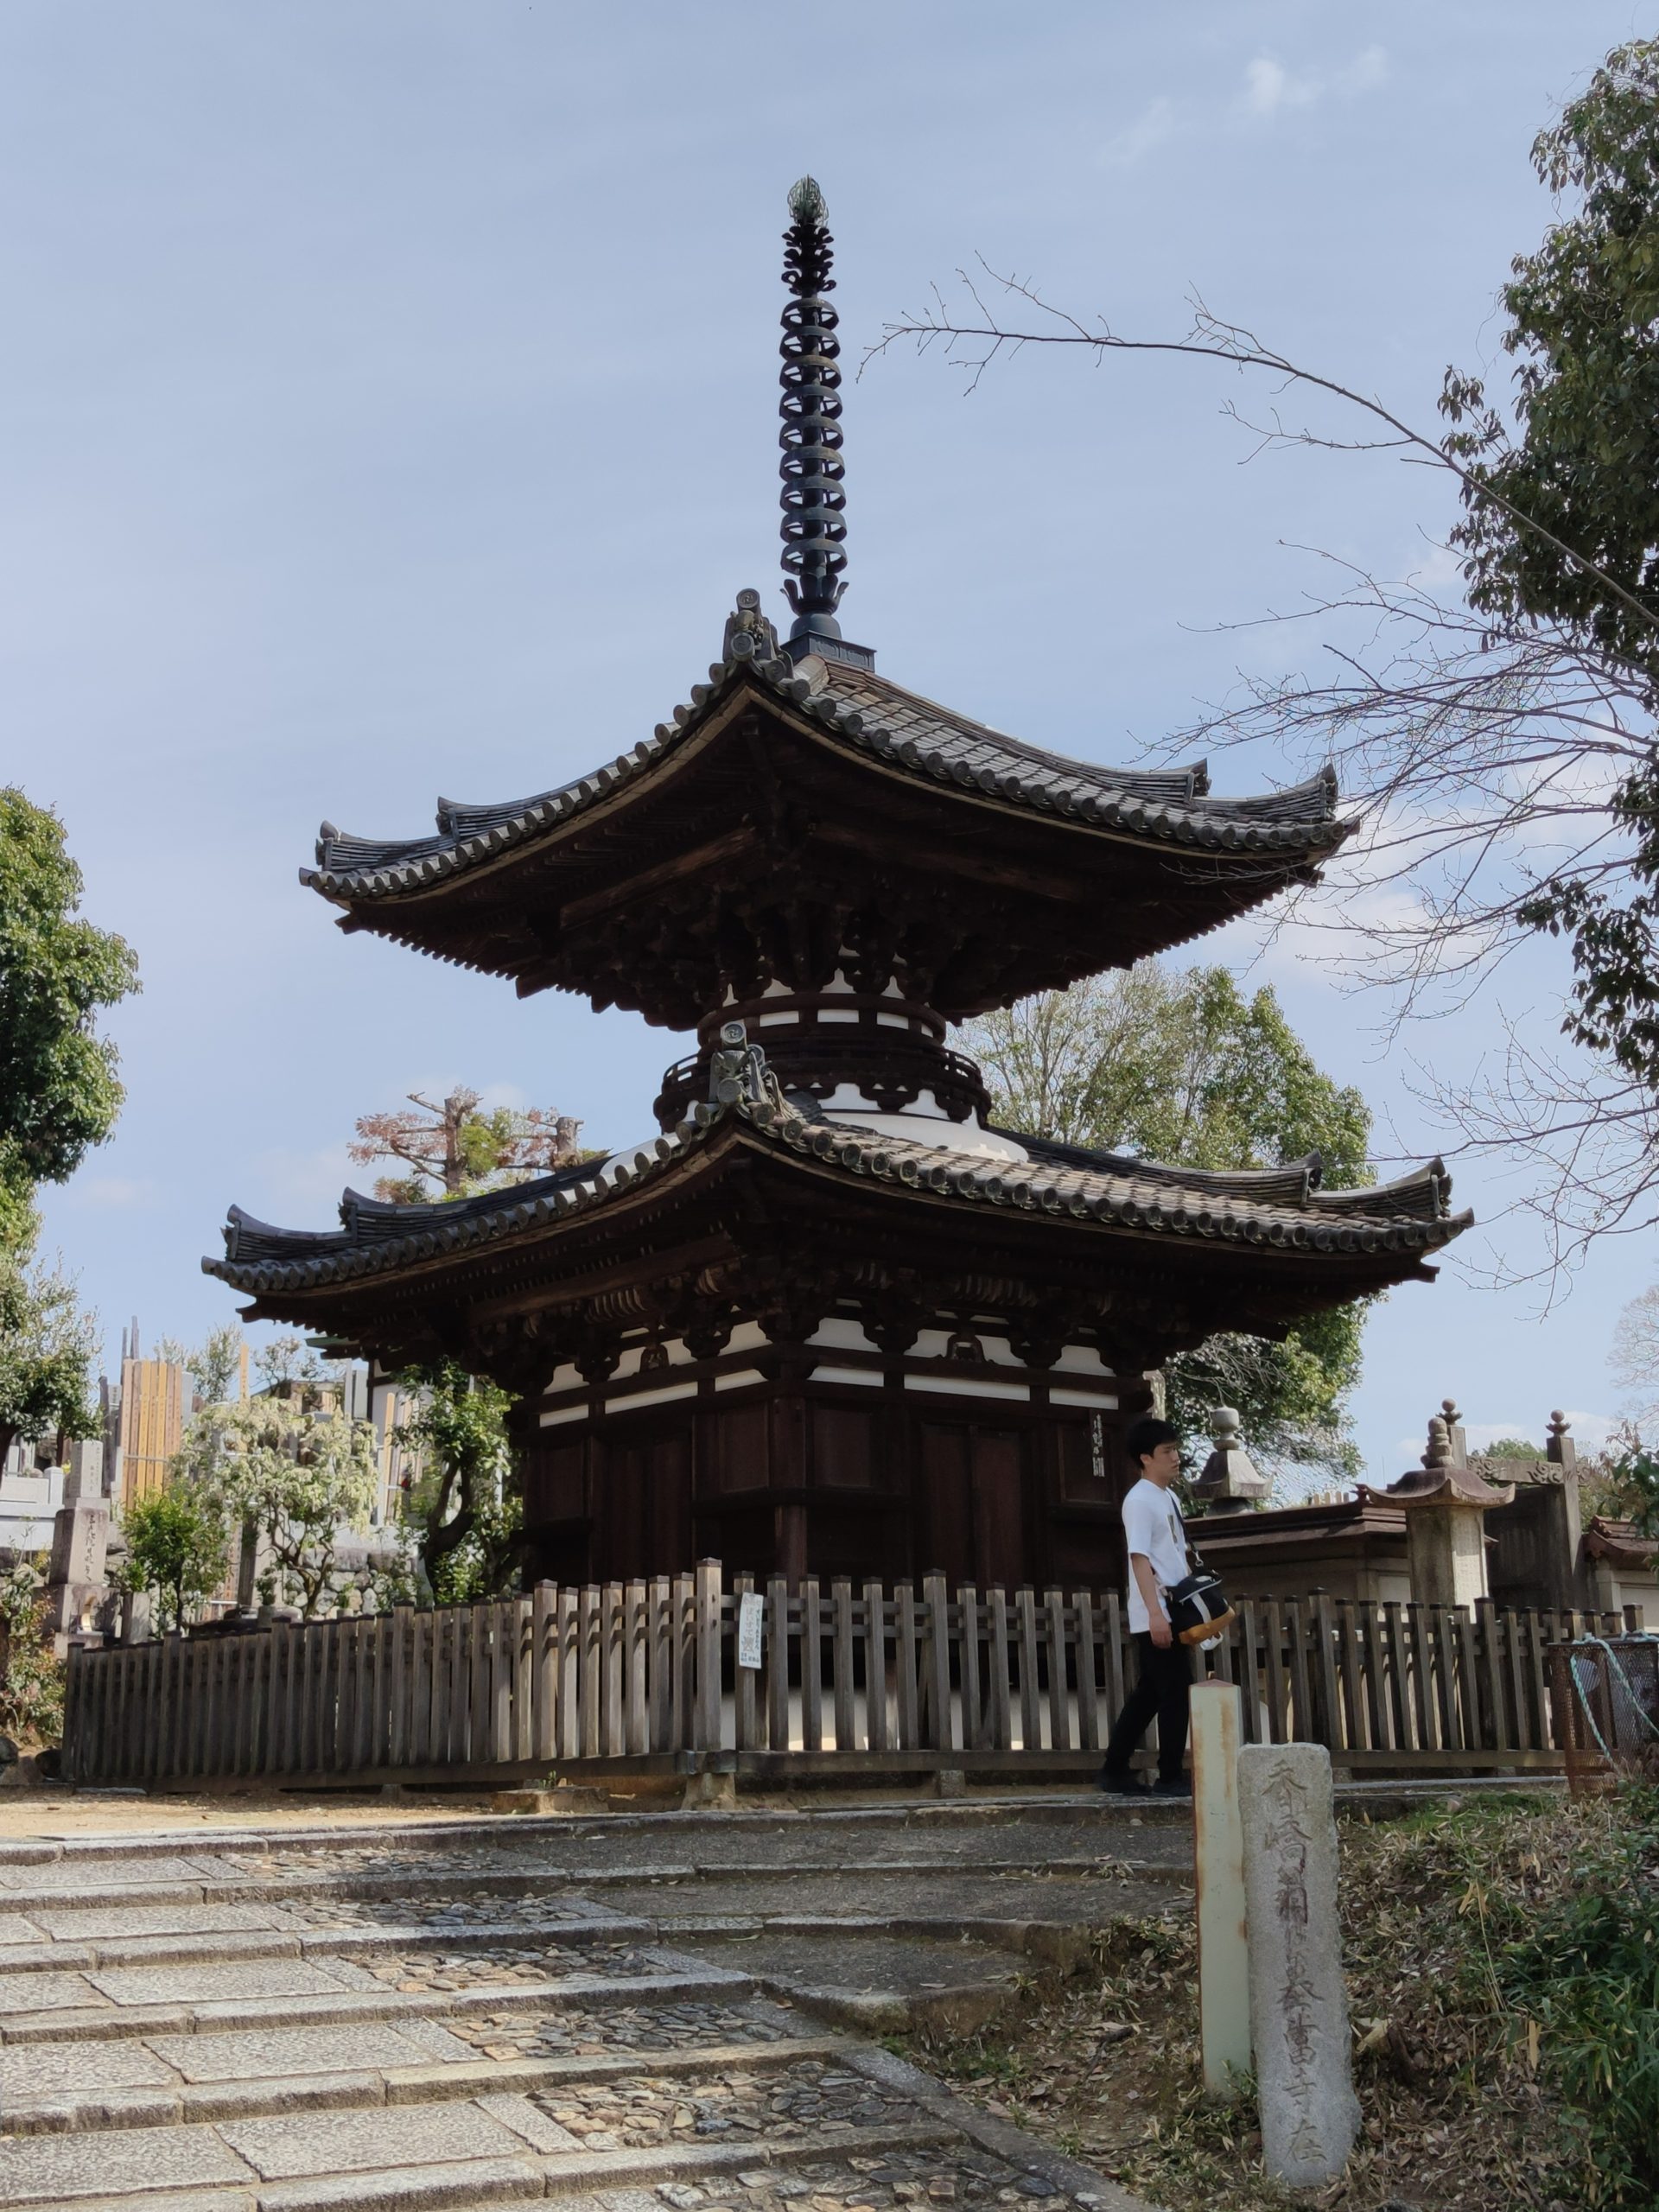 Oldest pagoda in Kyoto